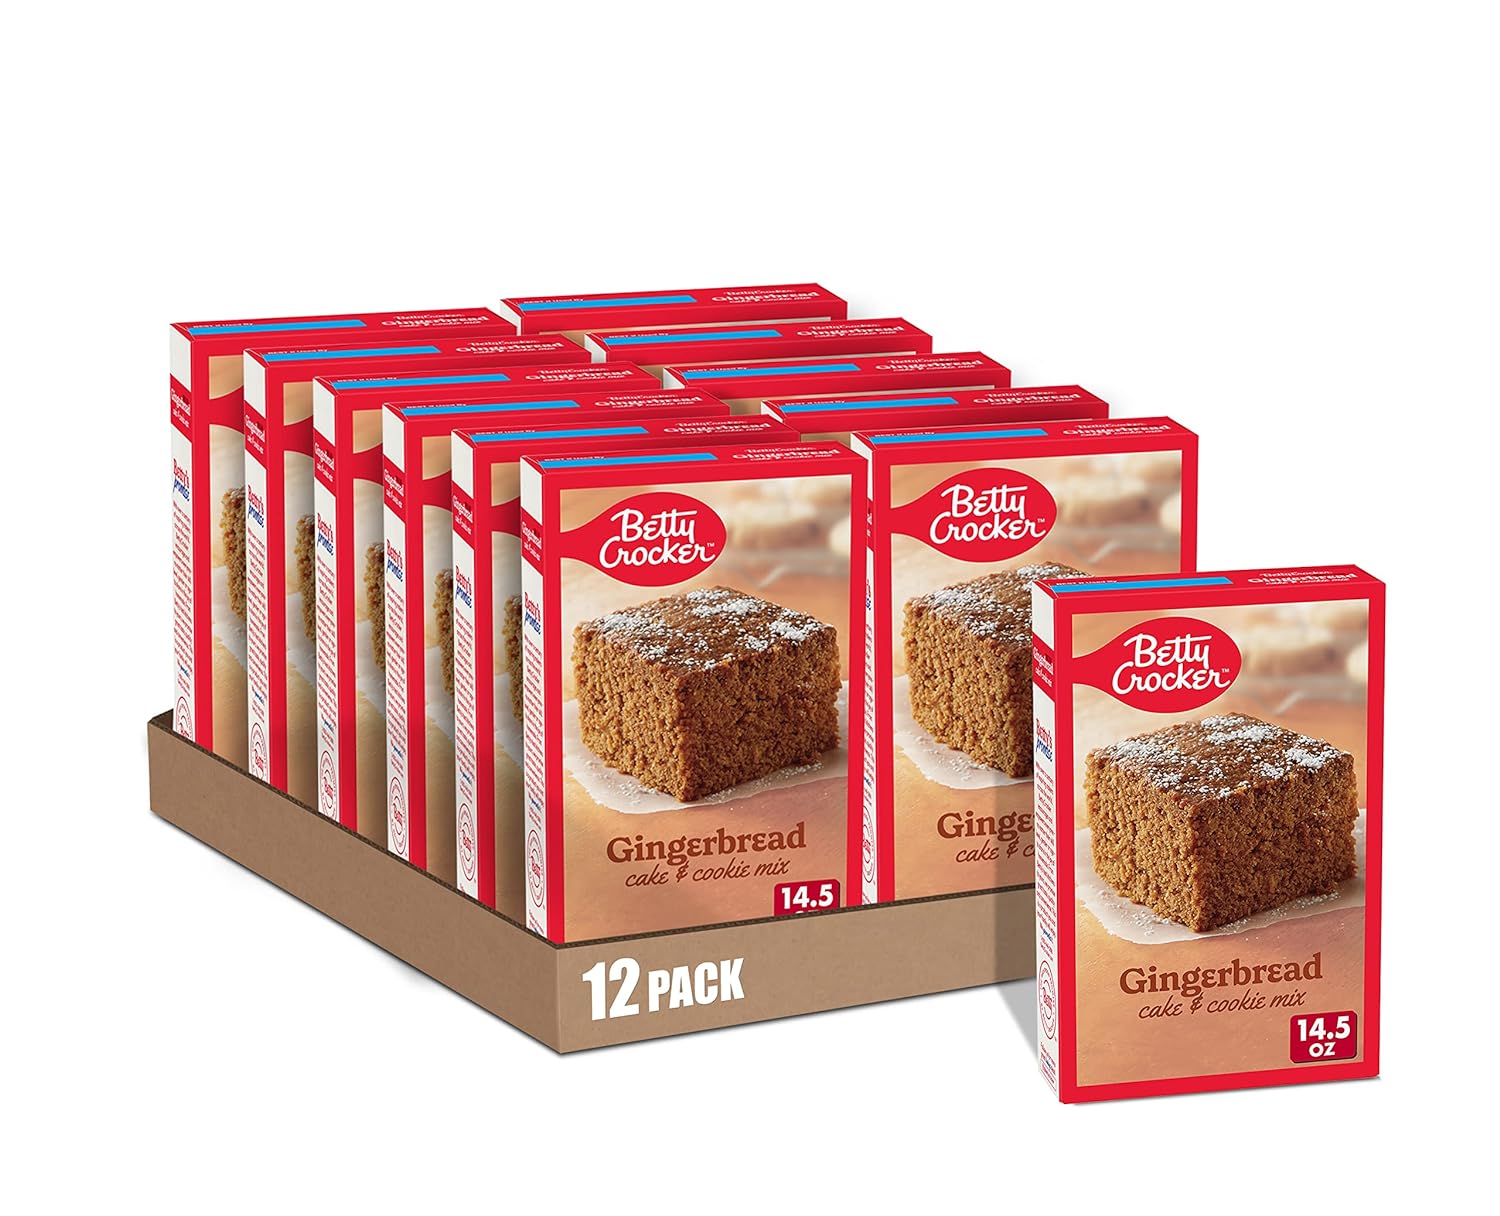 Betty Crocker Gingerbread Cake and Cookie Mix, 14.5 oz. (Pack of 12)